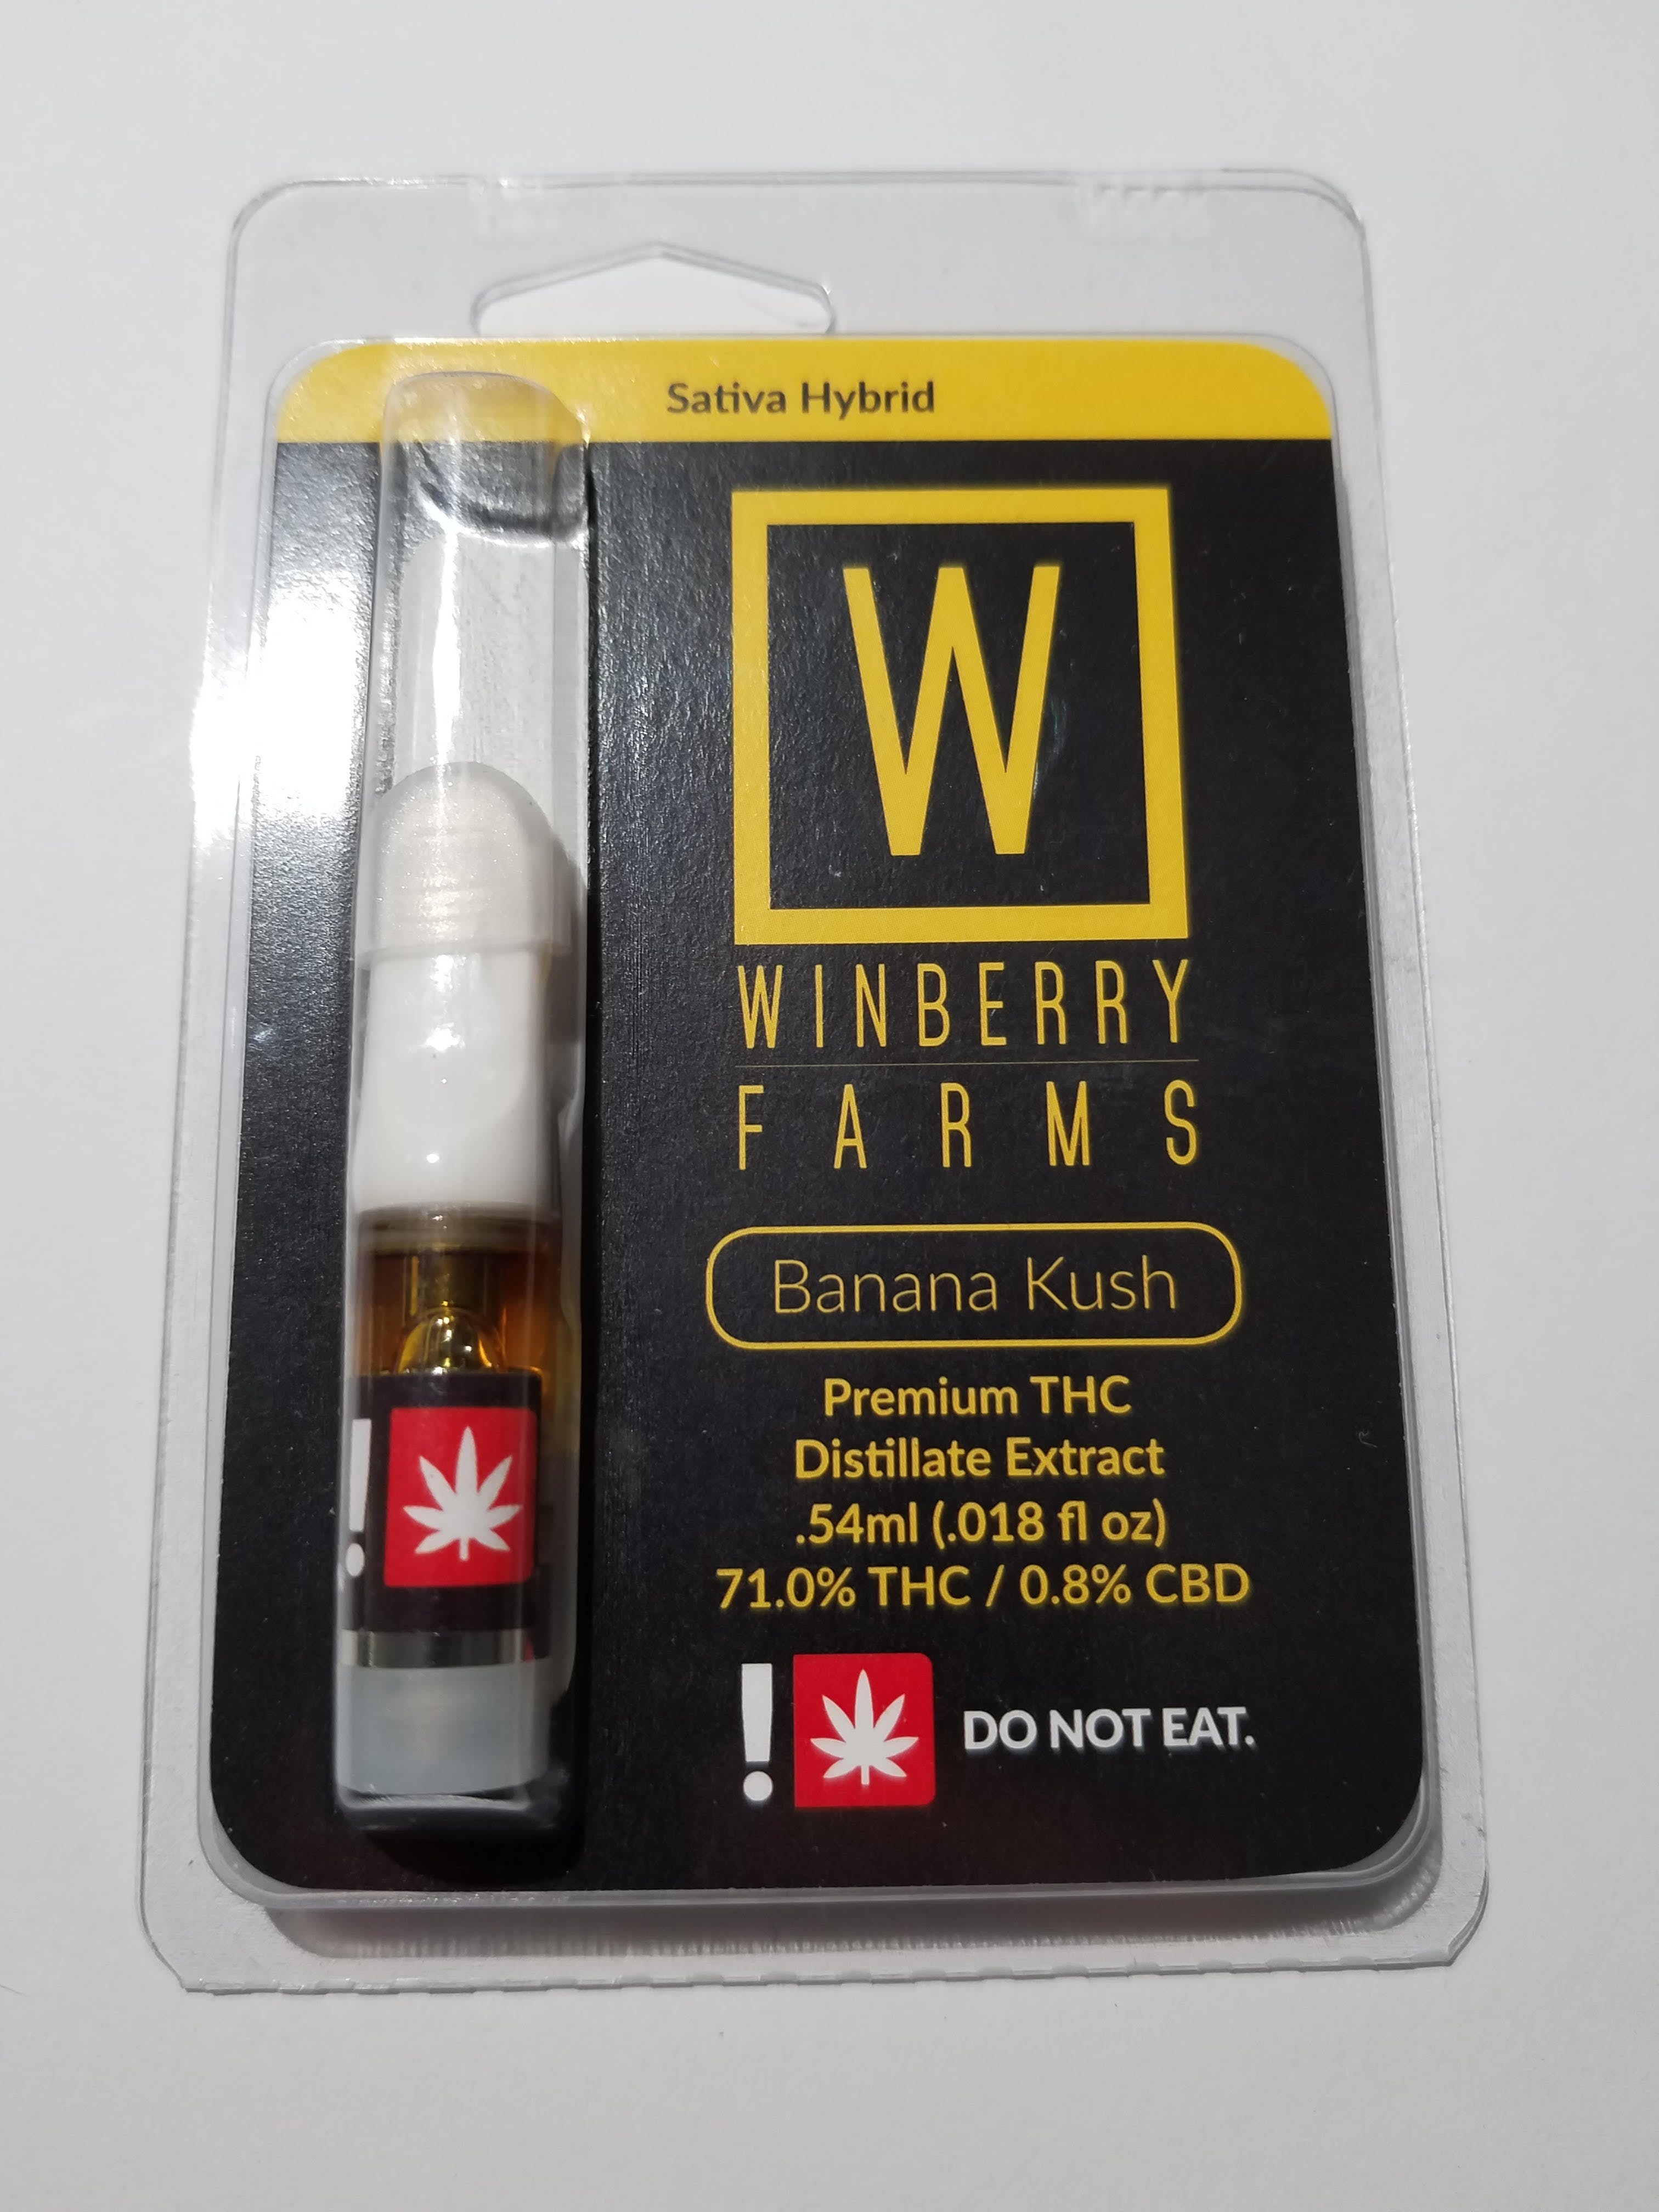 concentrate-5g-banana-kush-cartridge-winberry-farms